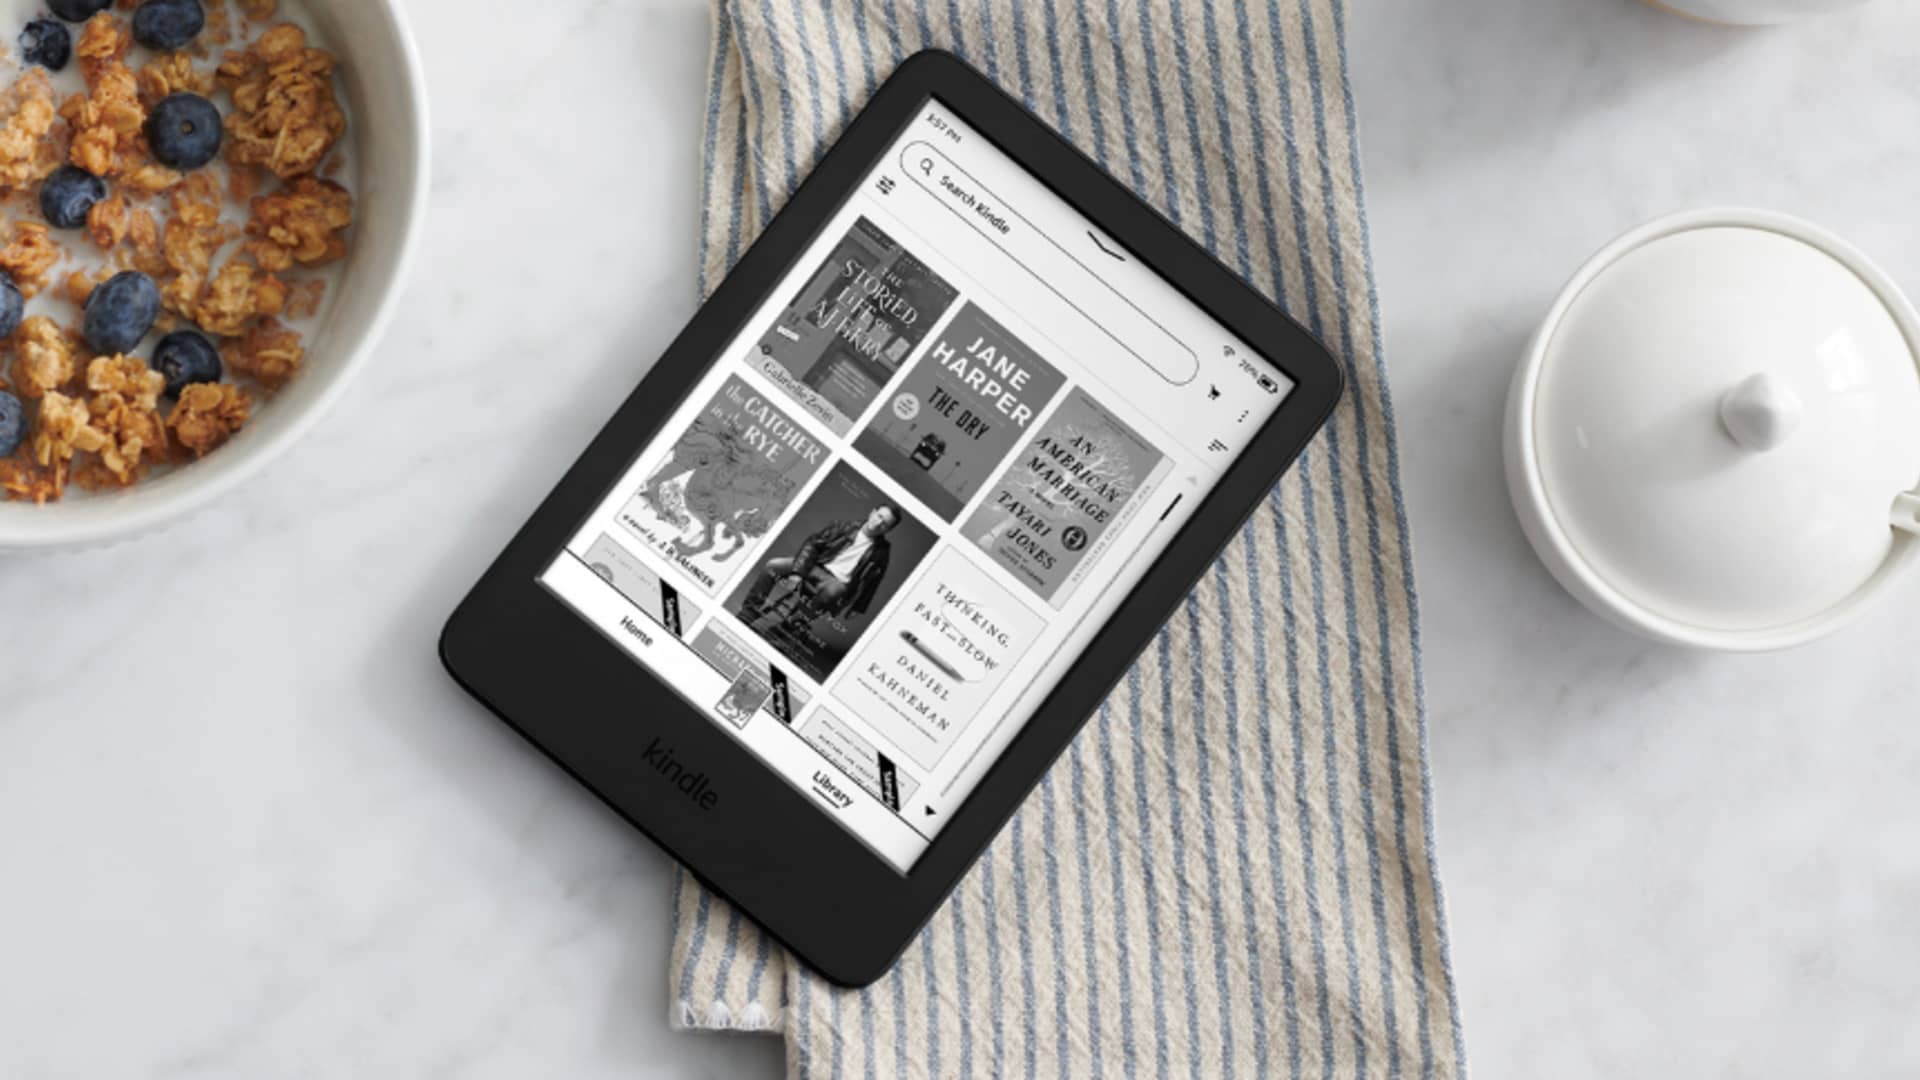 Amazon announces new  Kindle e-reader with better screen